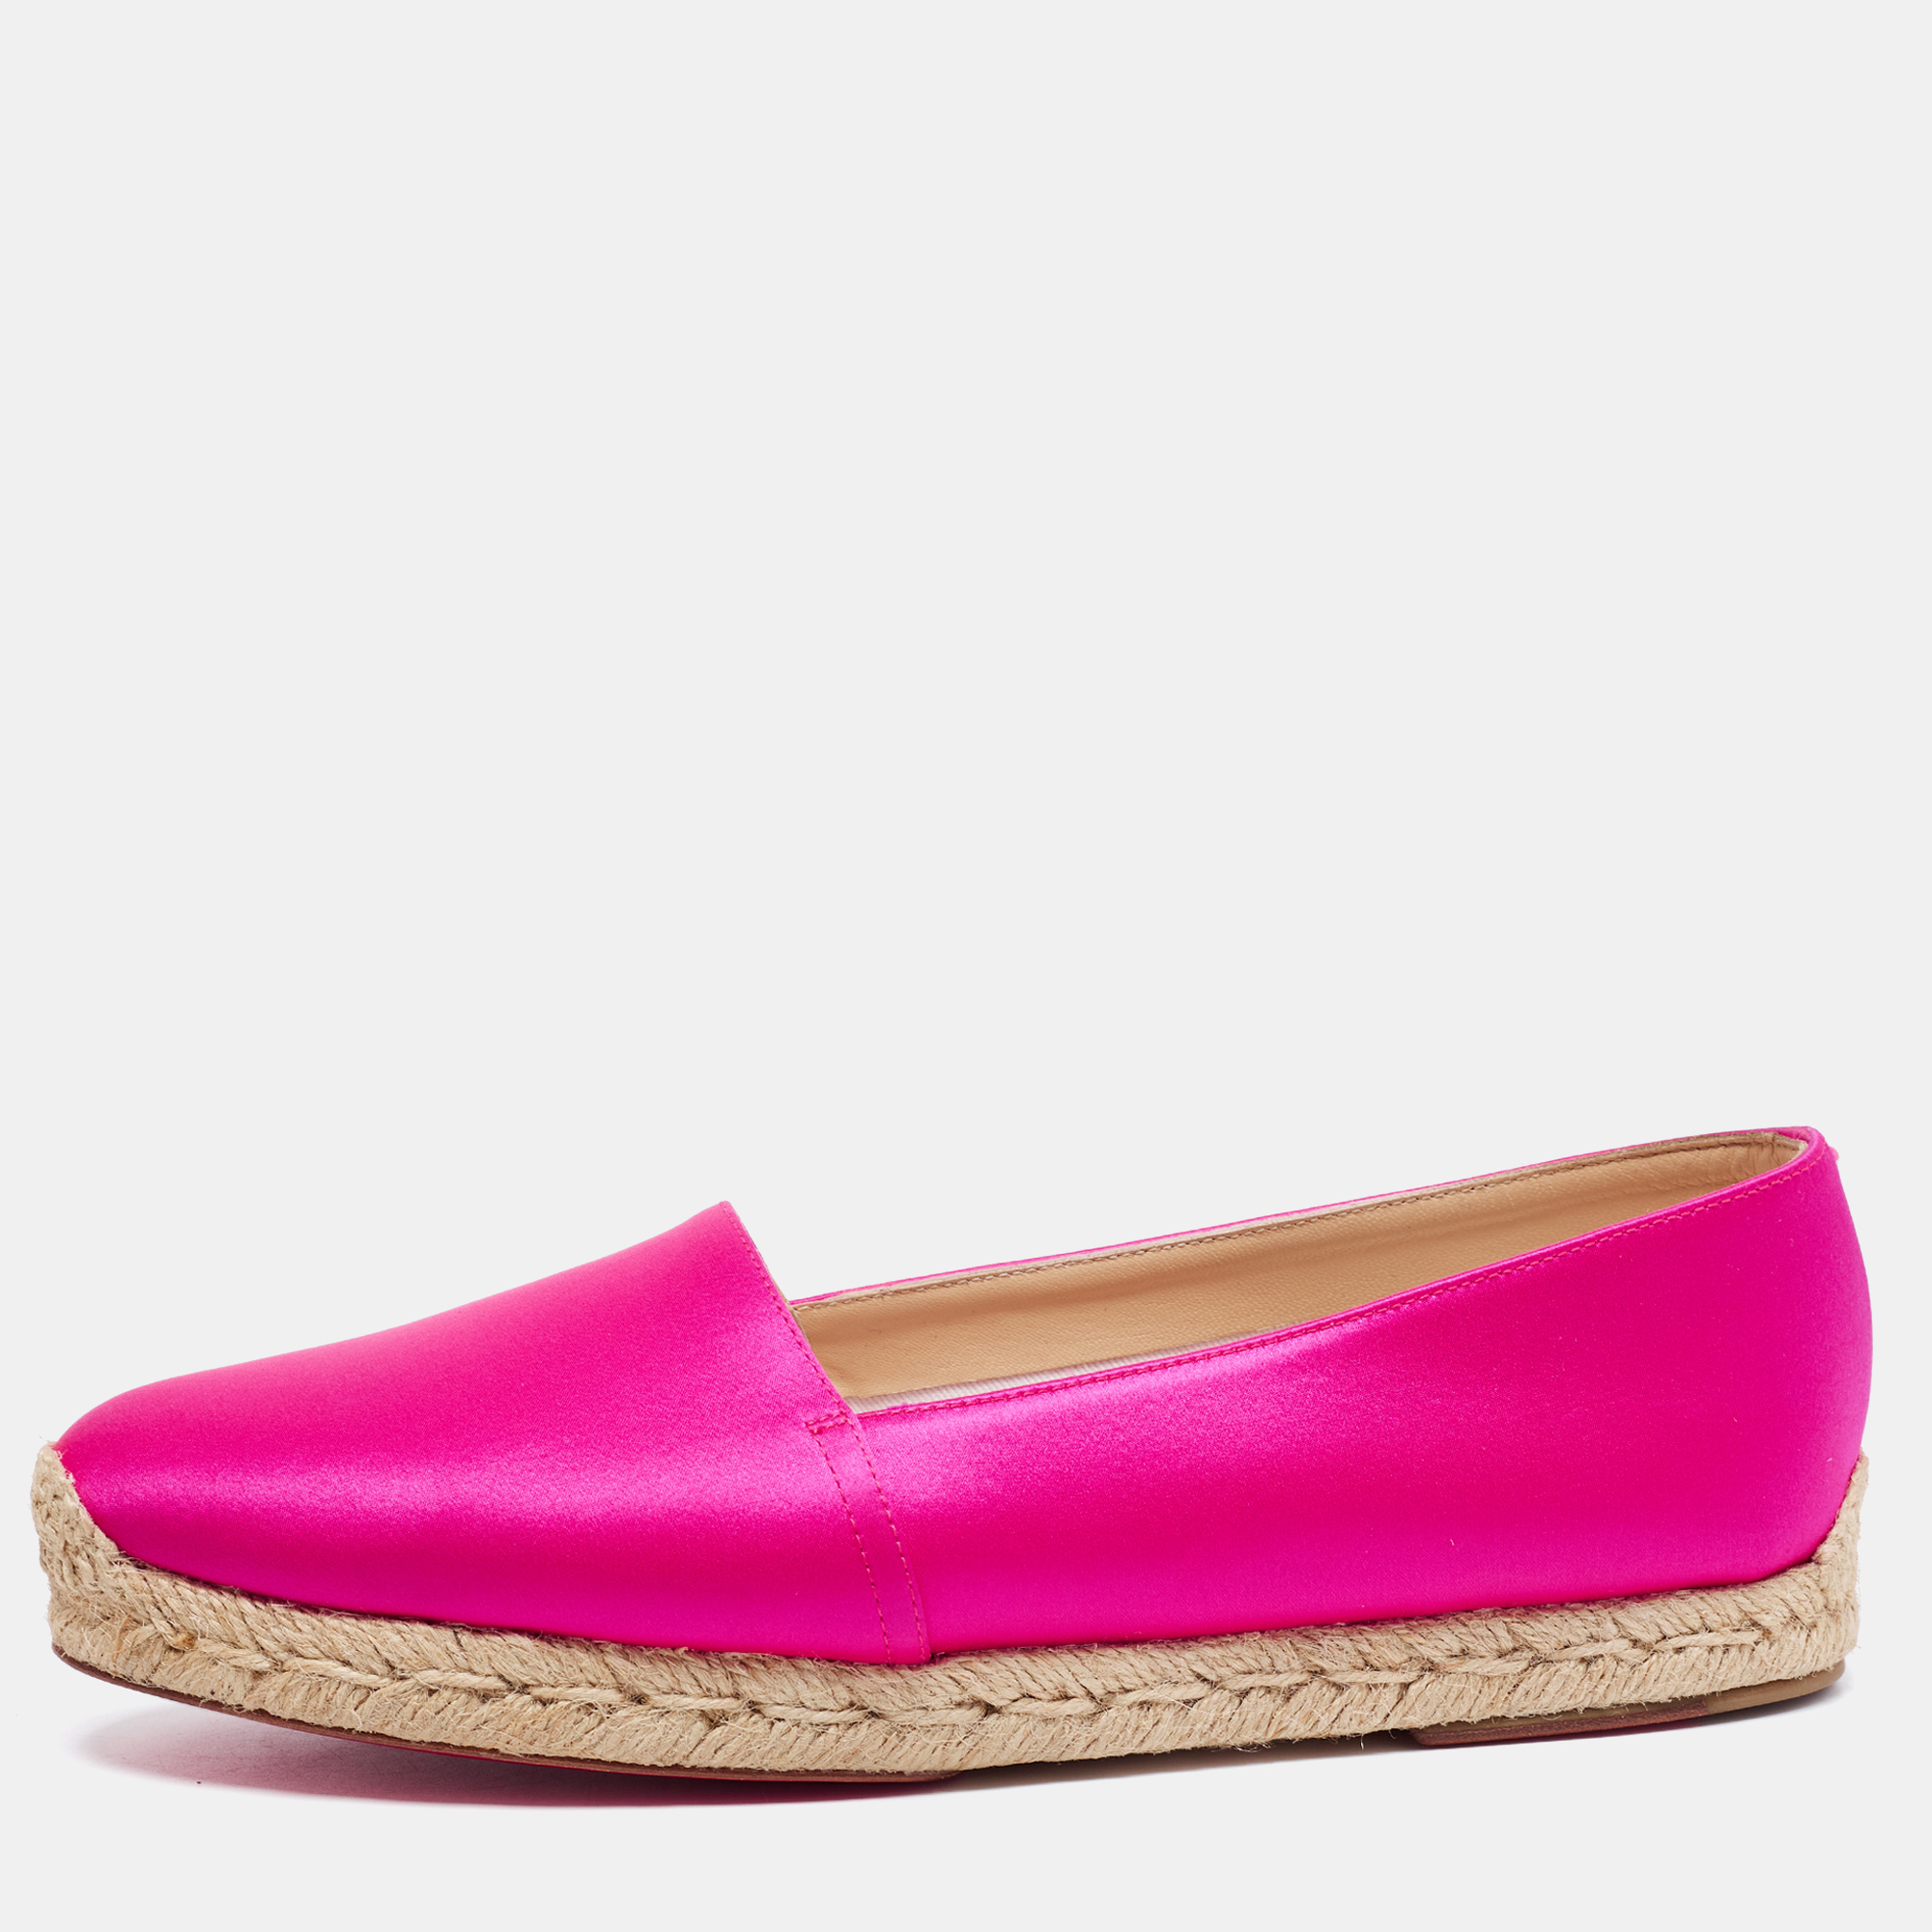 Pre-owned Christian Louboutin Pink Satin Espachica Espadrilles Flats Size 39